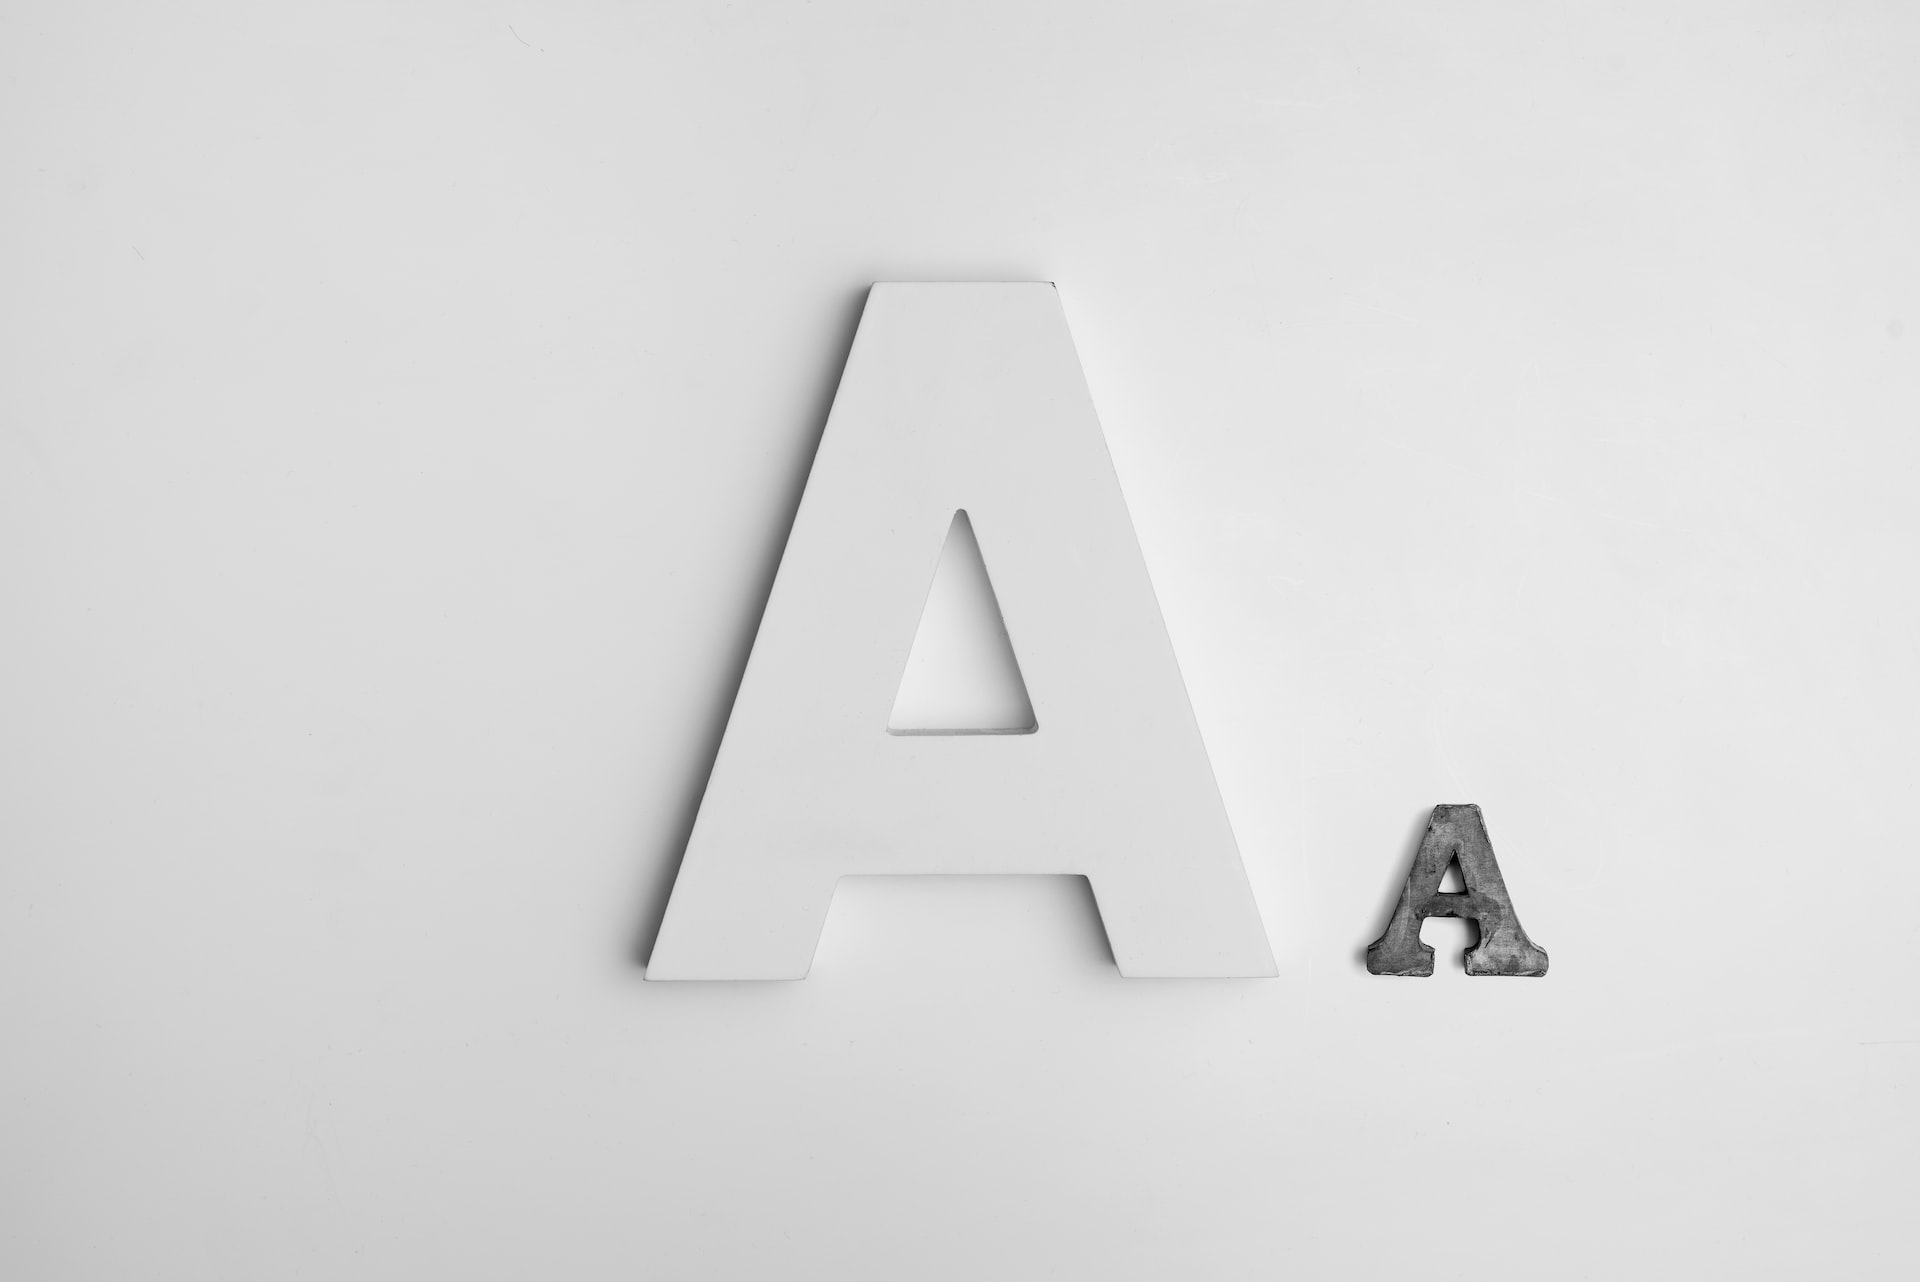 A graphic showing a large white capital A and a much smaller gray capital A beside it